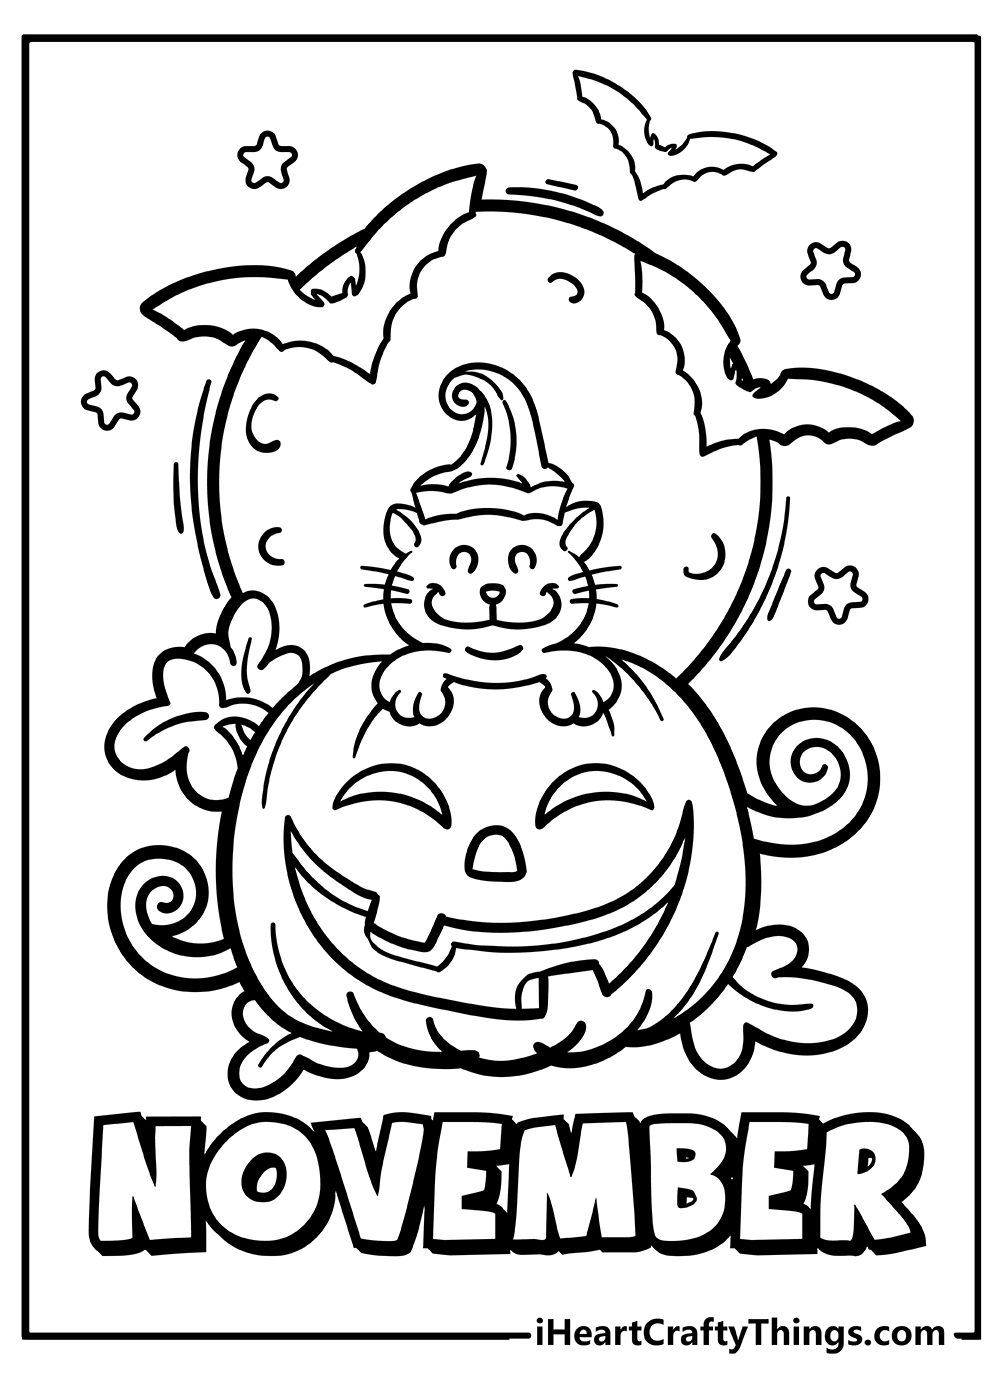 November Coloring Pages free pdf download